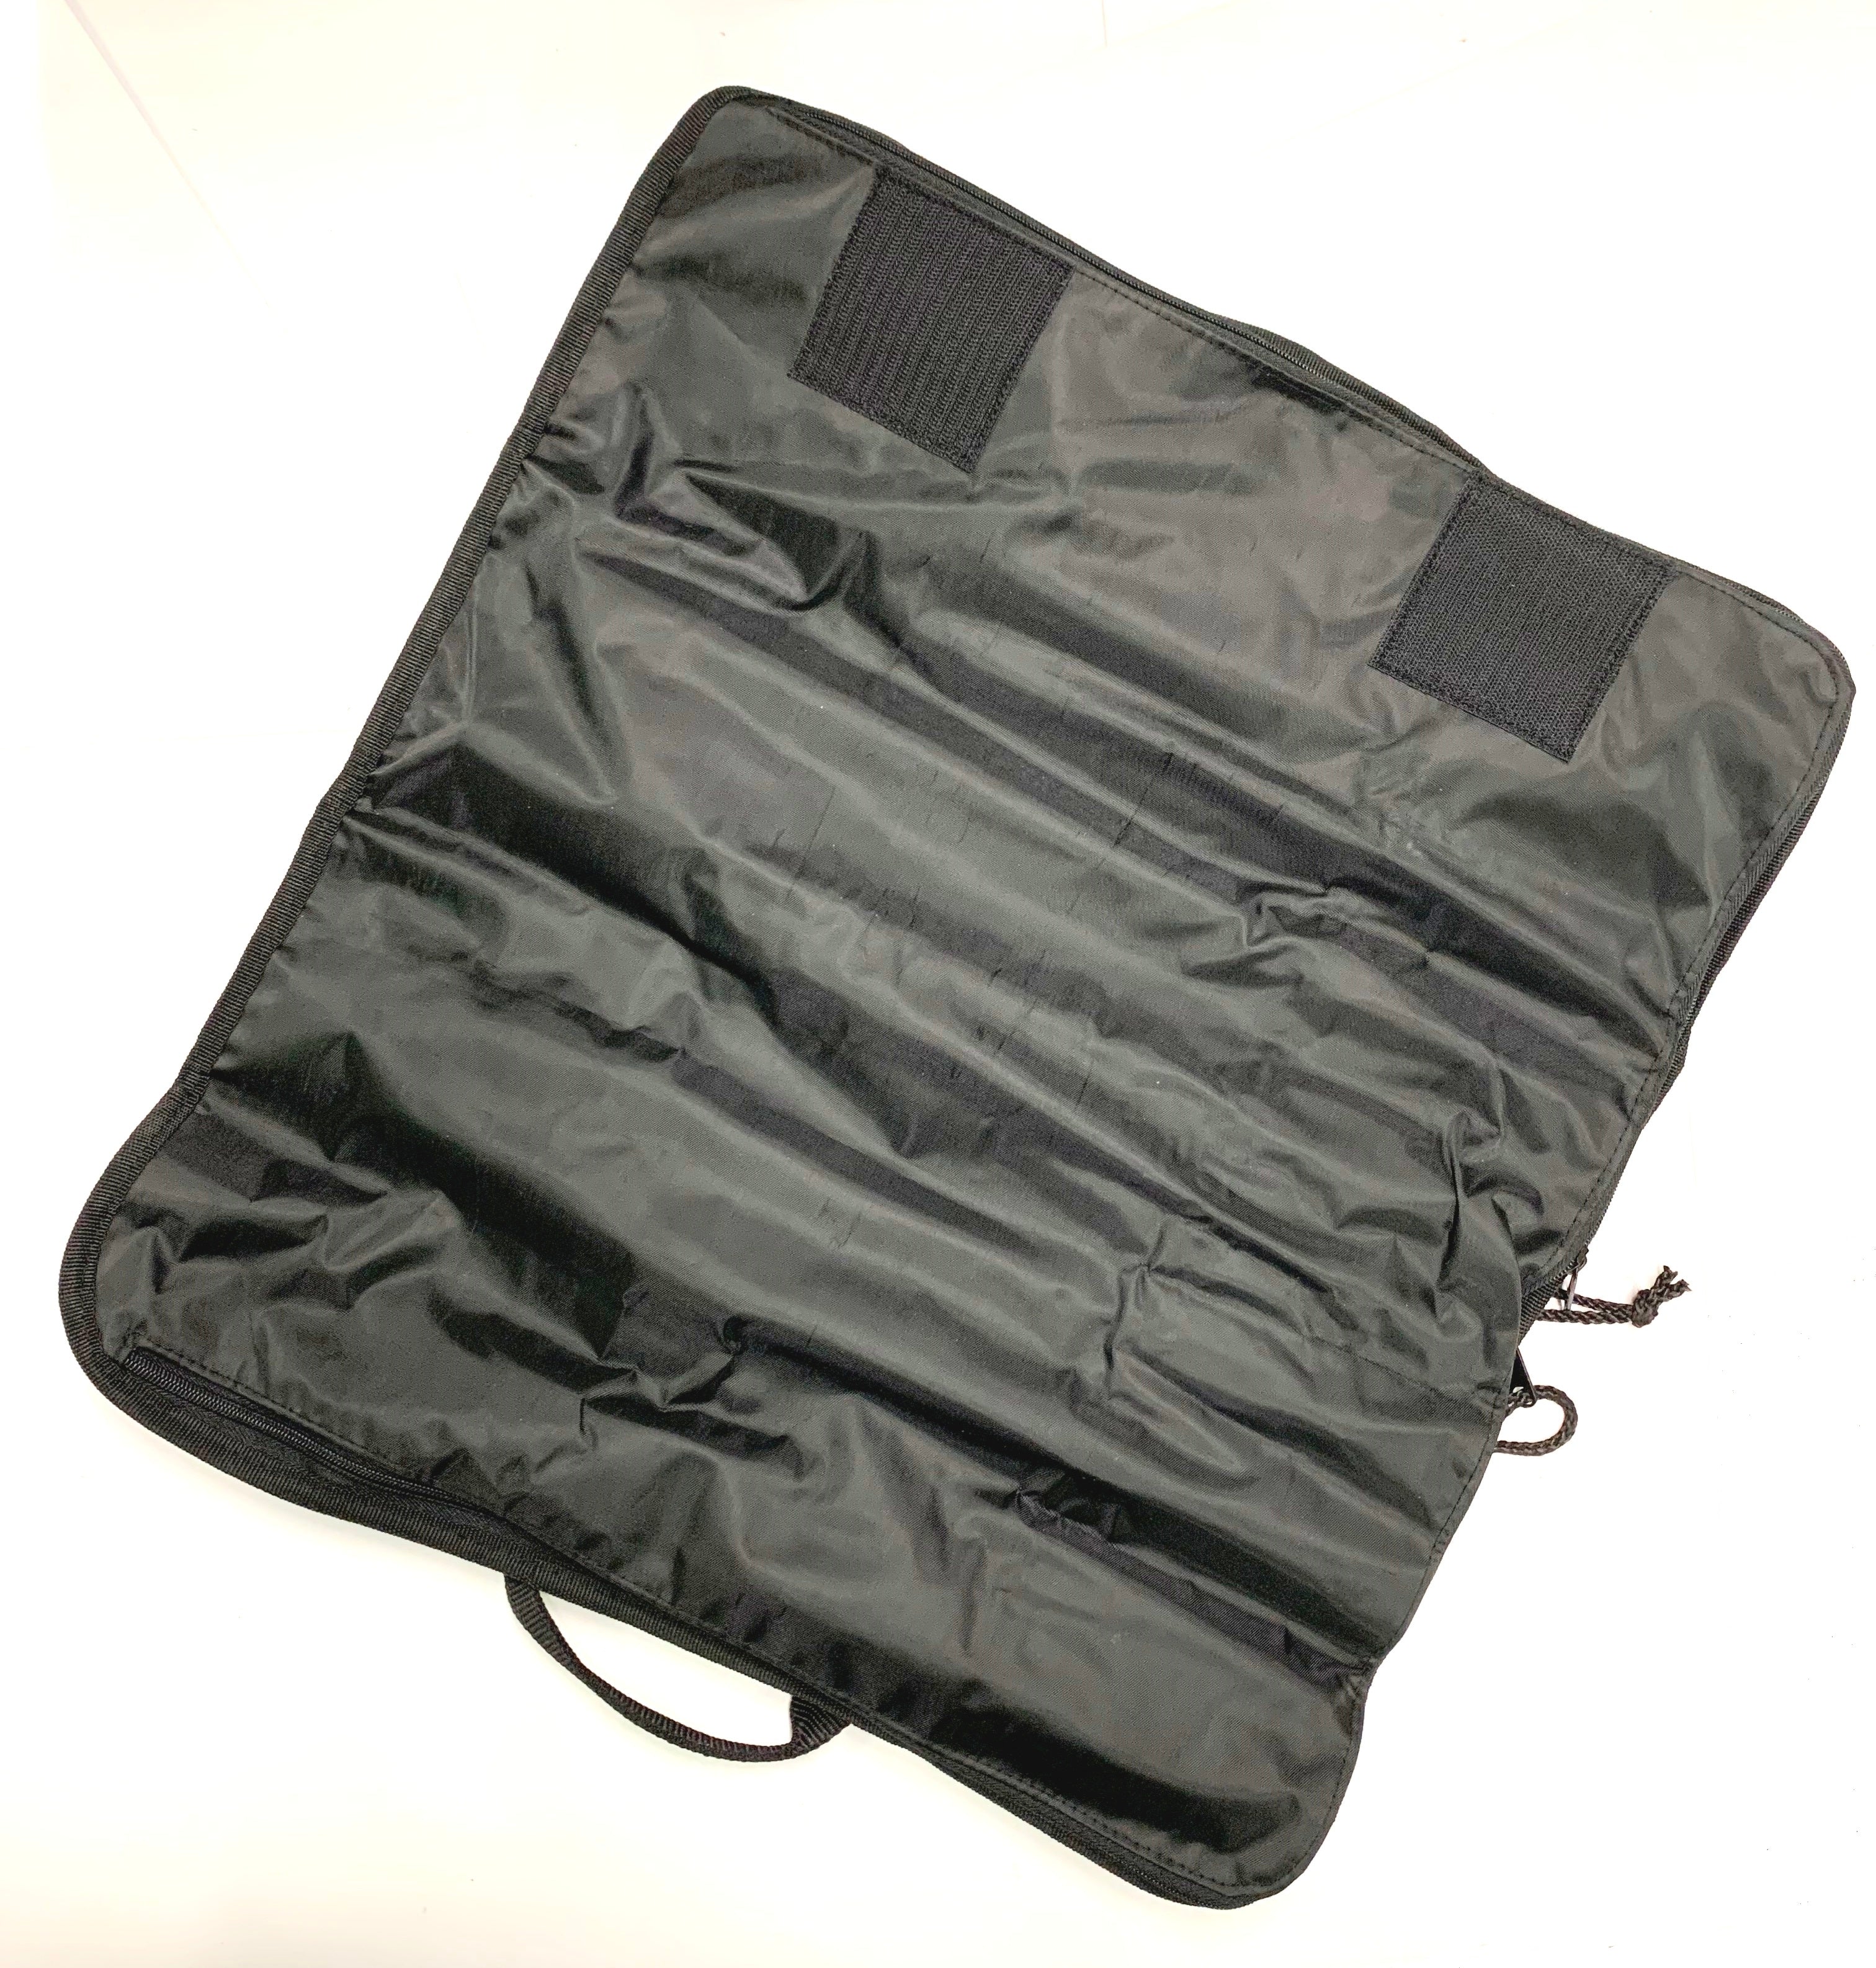 8 Paintball Gun Barrel Protective Storage Bag Roll Up case